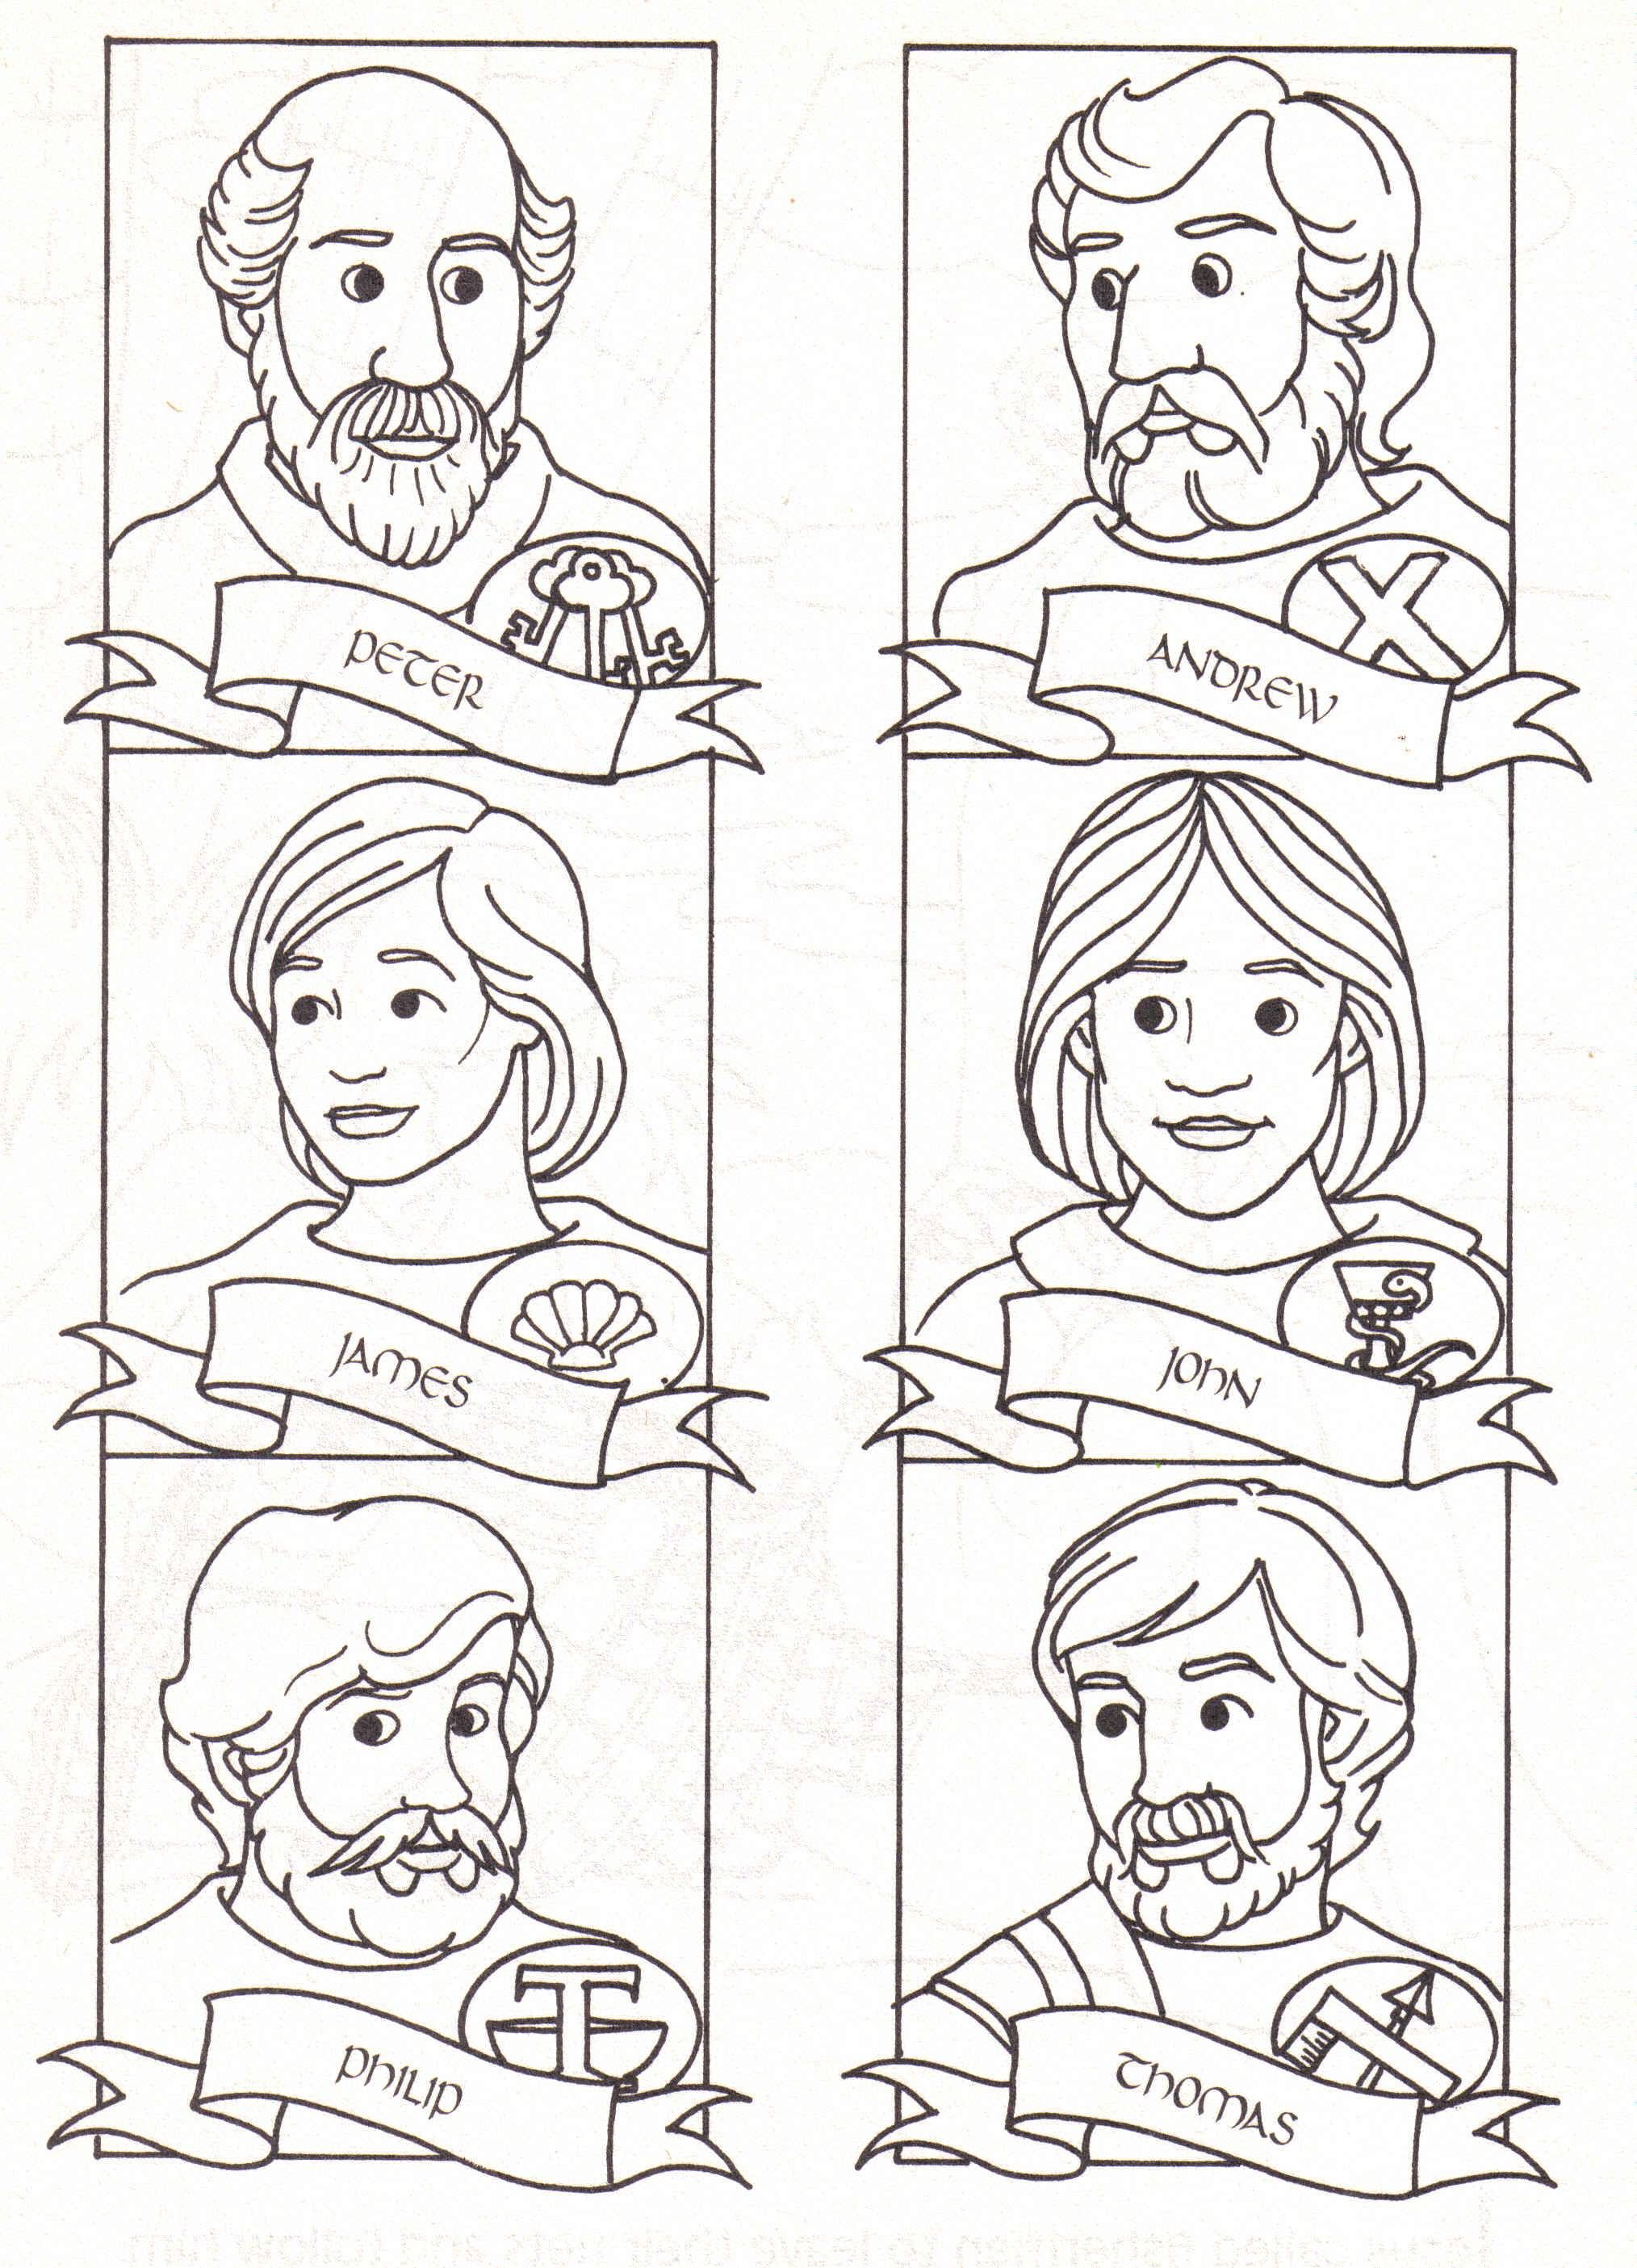 12 Disciples Coloring Page Download. I was thinking about ...